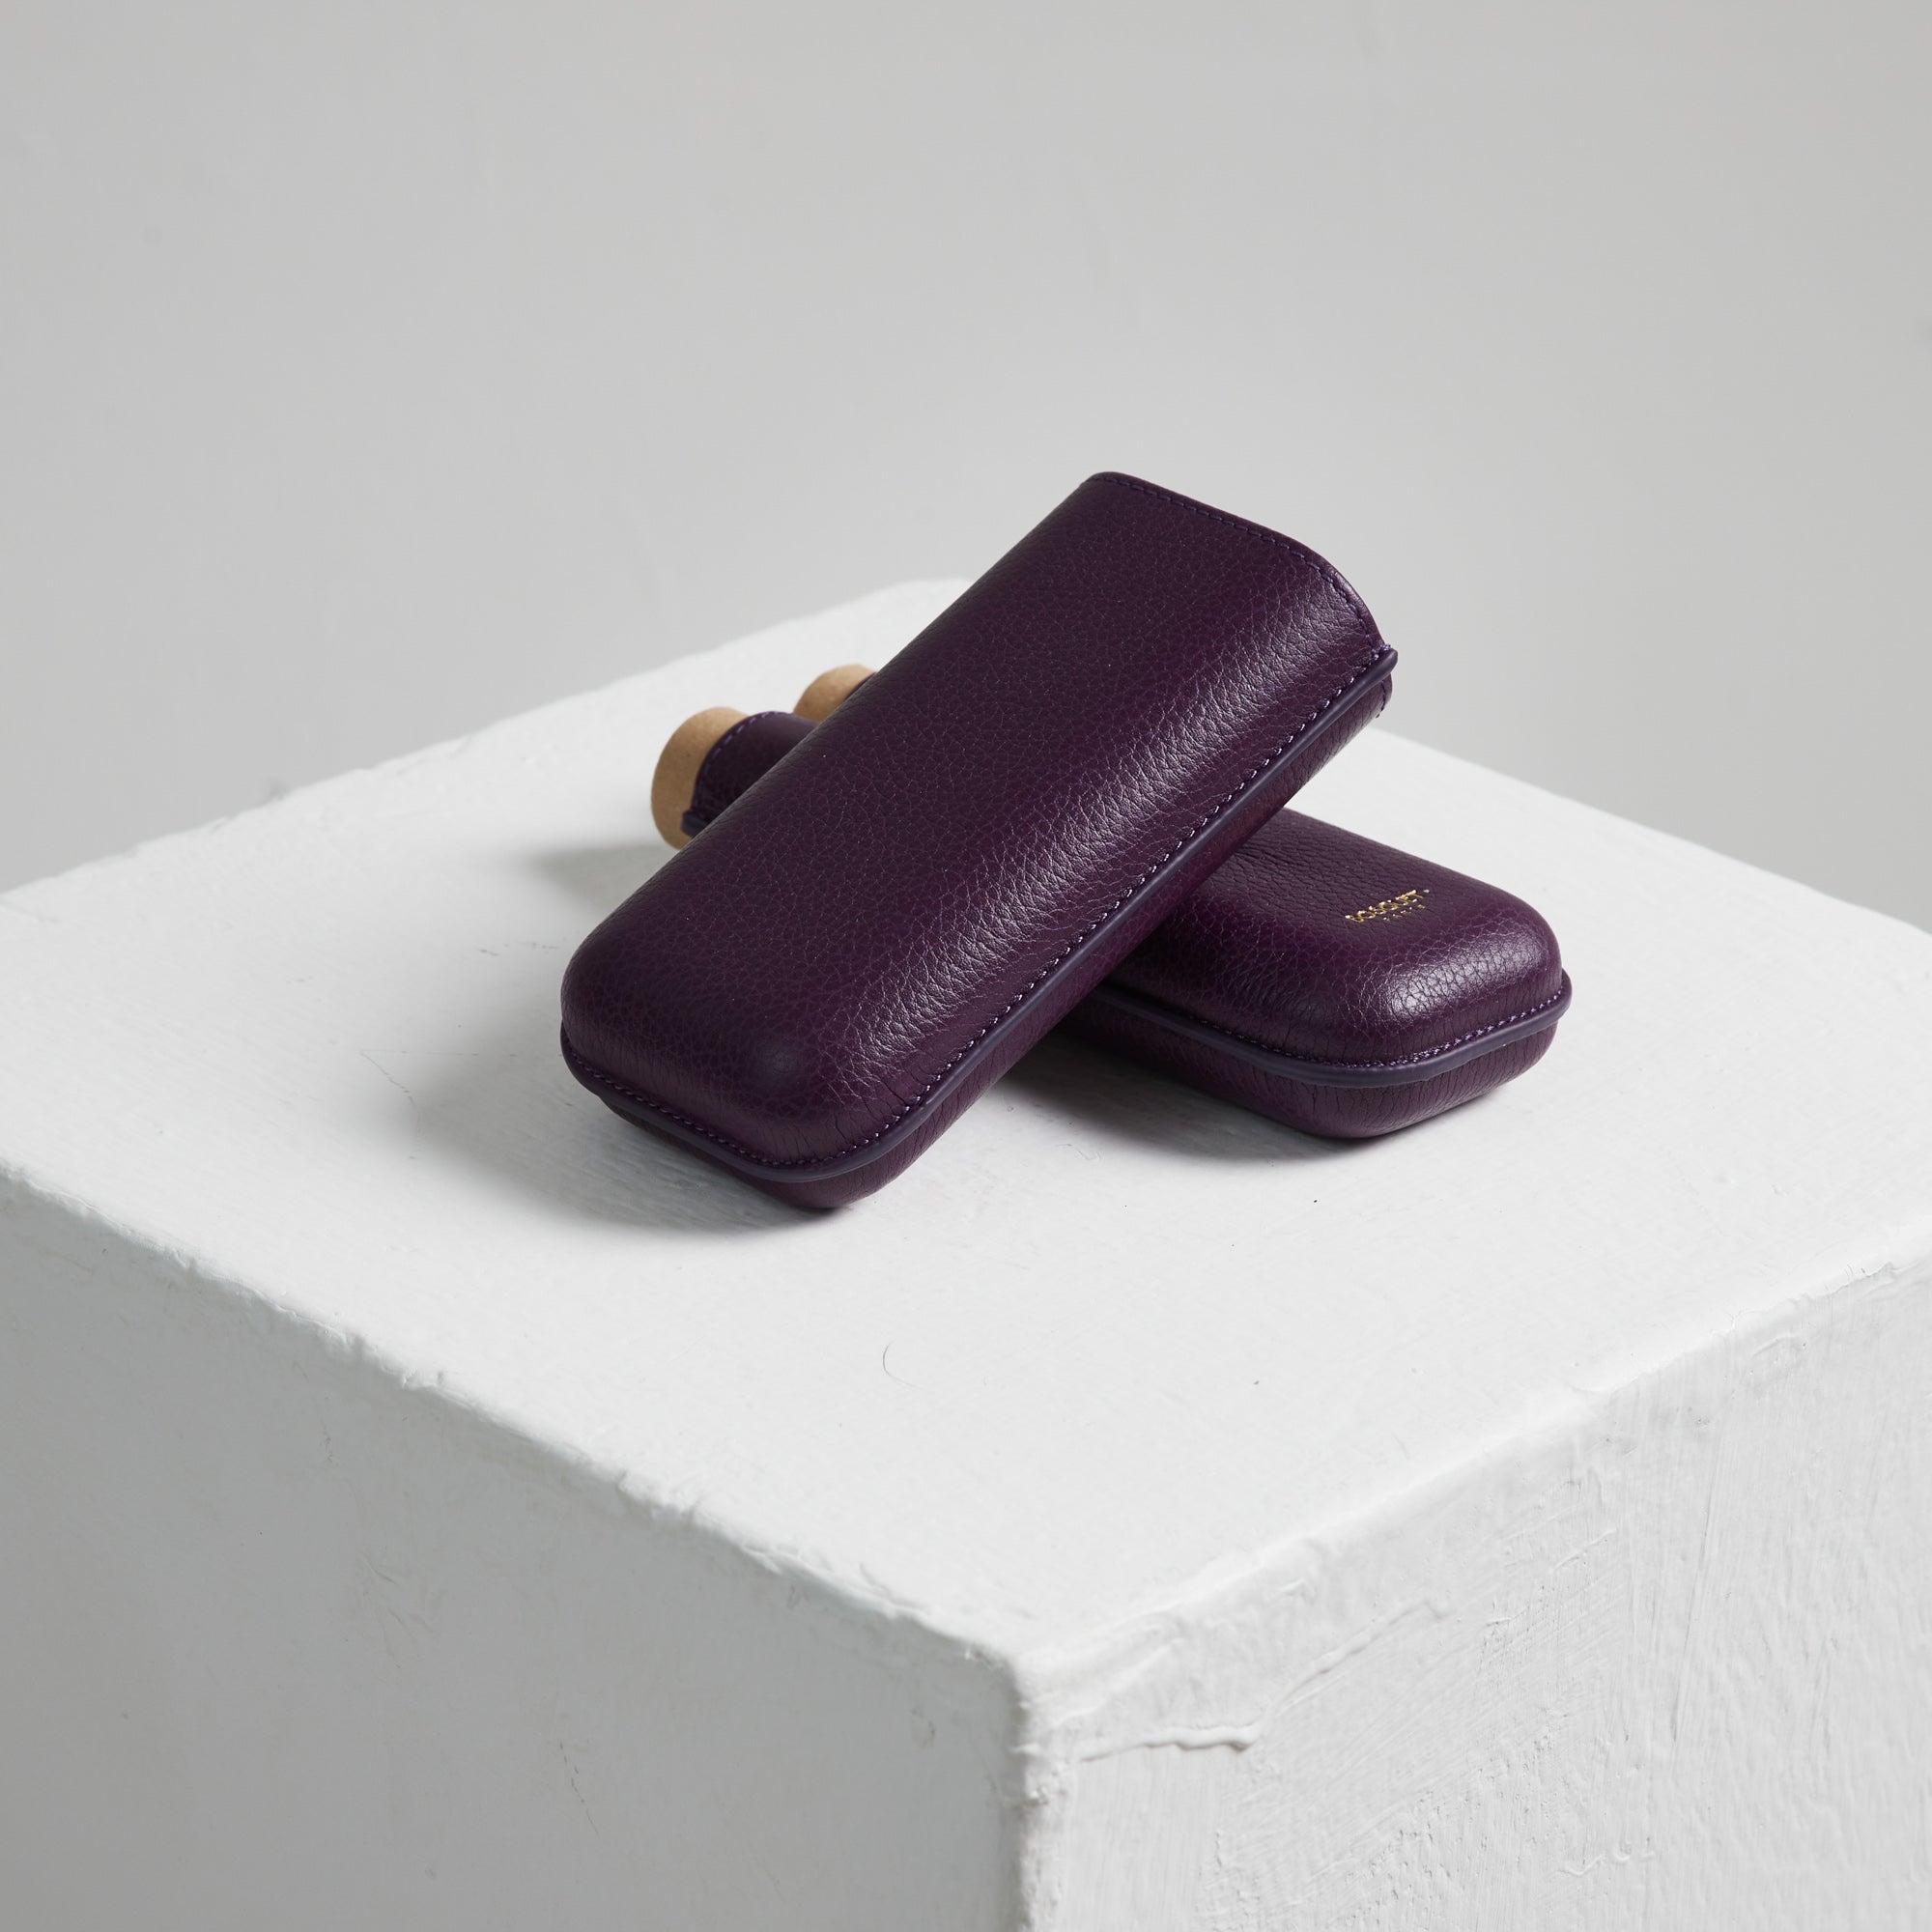 Two Bosquet Smooth Purple Leather Cigar Cases on top of a white cube.